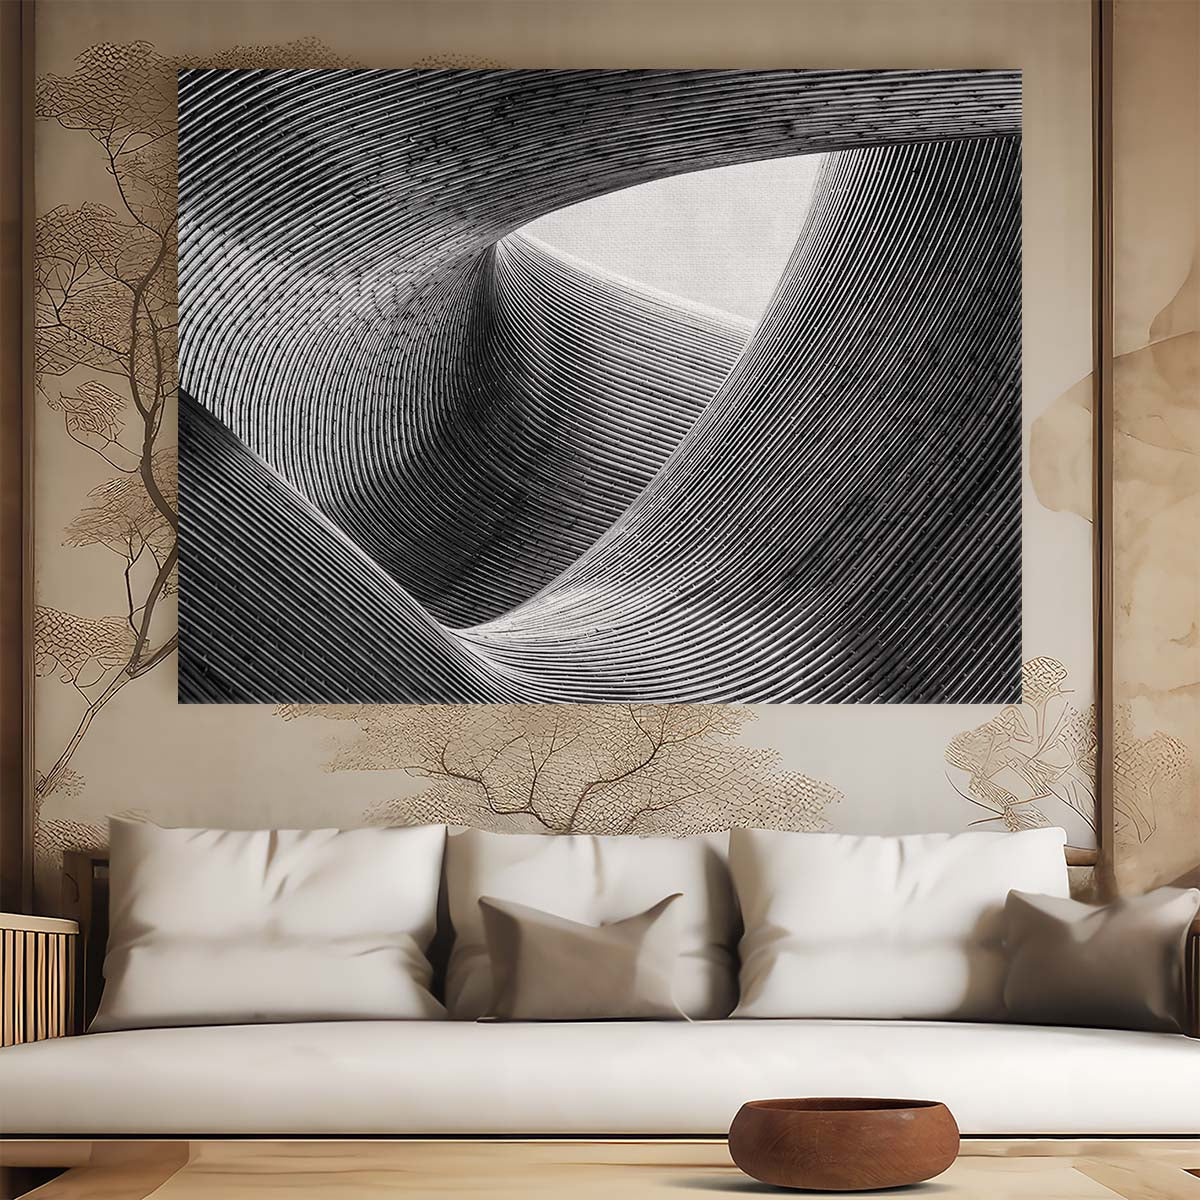 Monochrome Metal Curves Abstract Sculpture Wall Art by Luxuriance Designs. Made in USA.